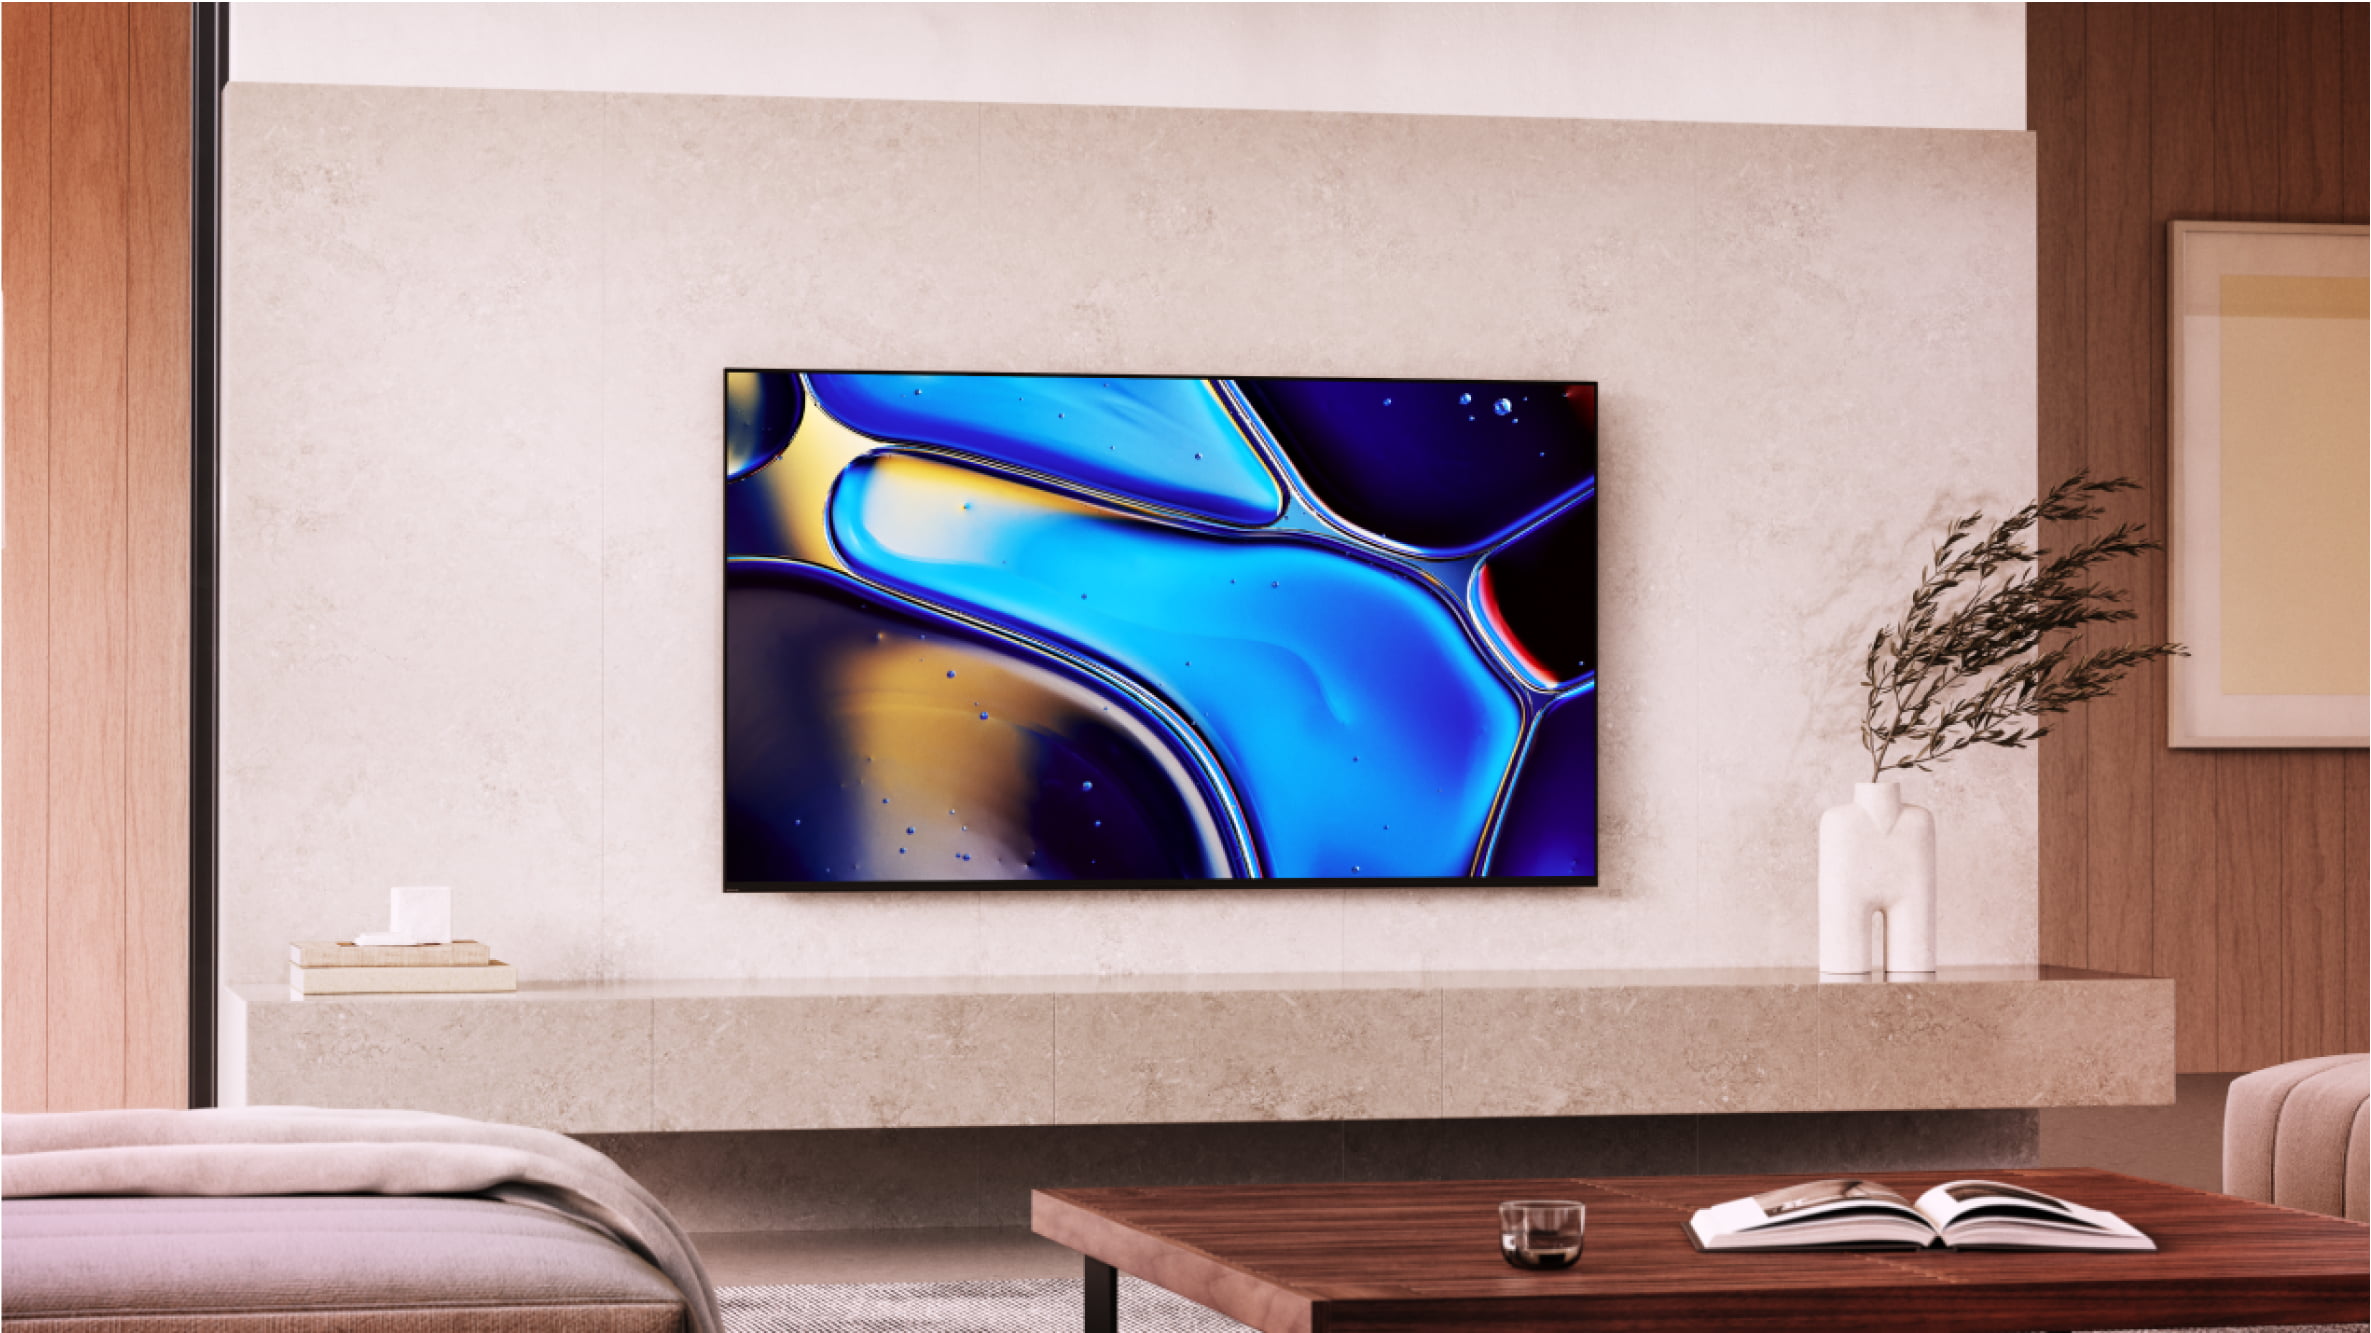 BRAVIA 8 Seamlessly blends into your wall